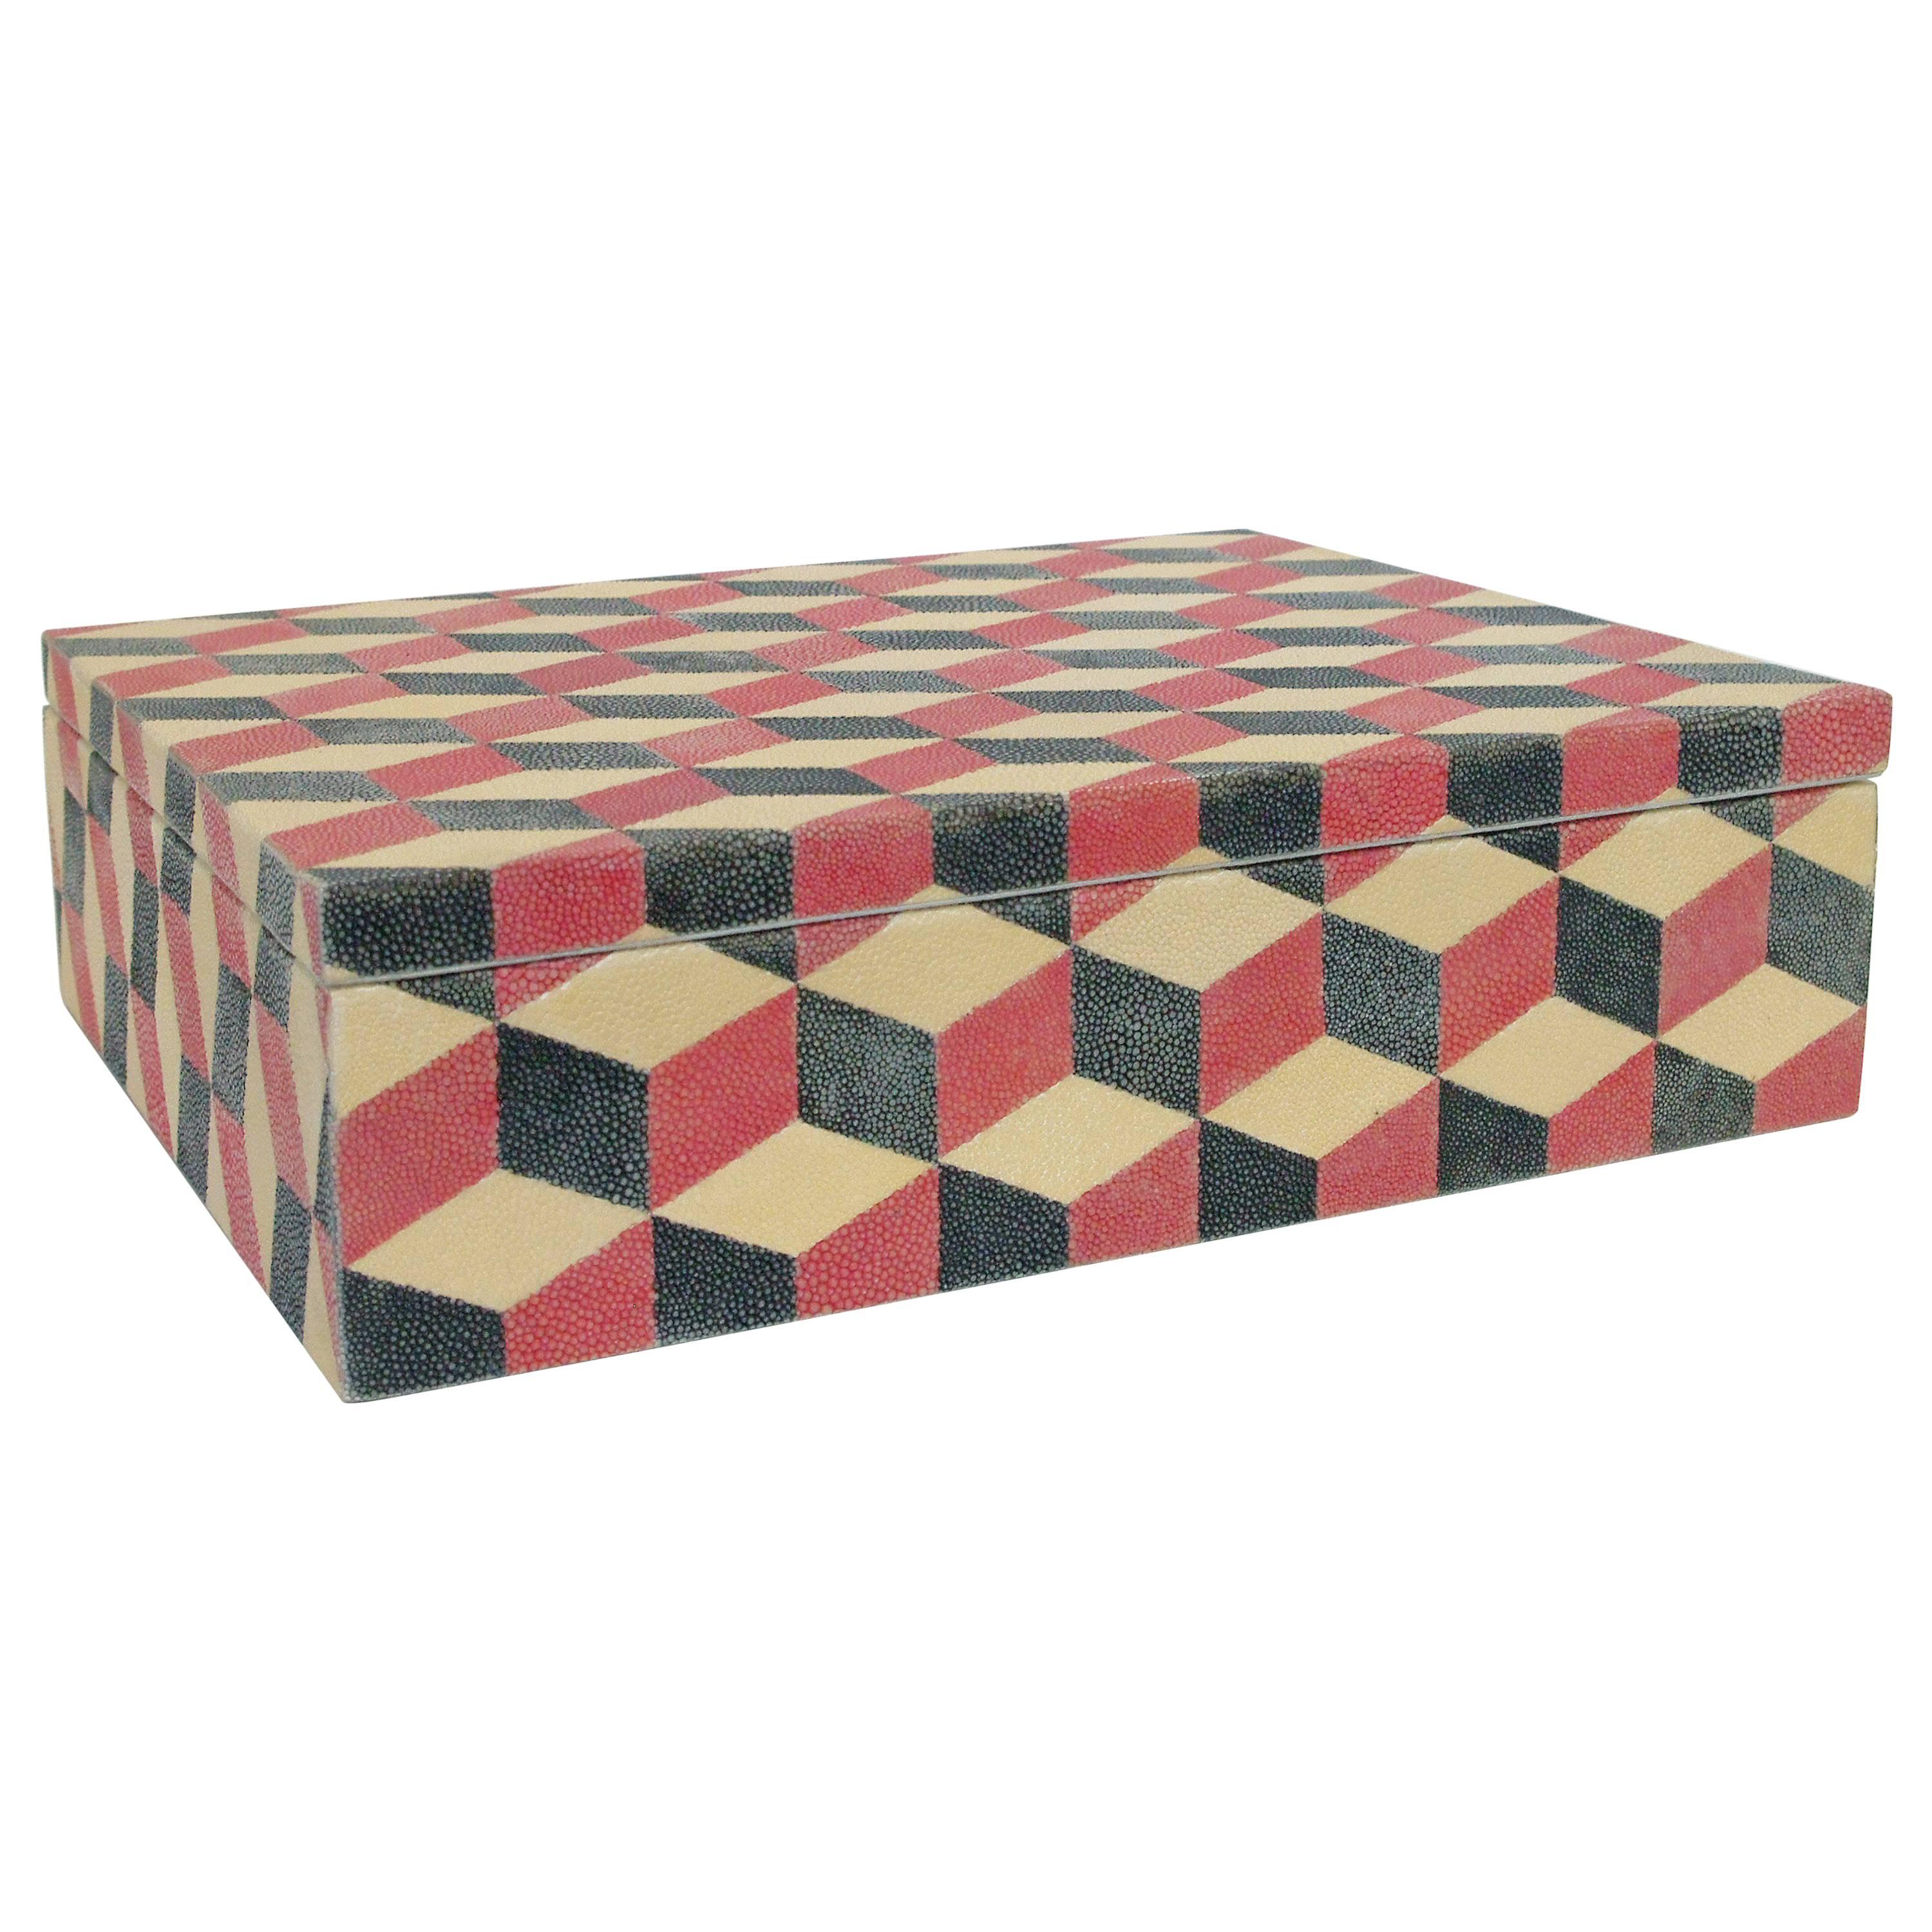 Box with cream, red, and black Shagreen diamond shaped pattern and gray suede interior
Depth: 11 inches / Width: 14.5 inches / Height: 4.5 inches
1 in stock in Palm Springs currently ON SALE for $1,499!!!
Order Reference # : MR58

This piece makes